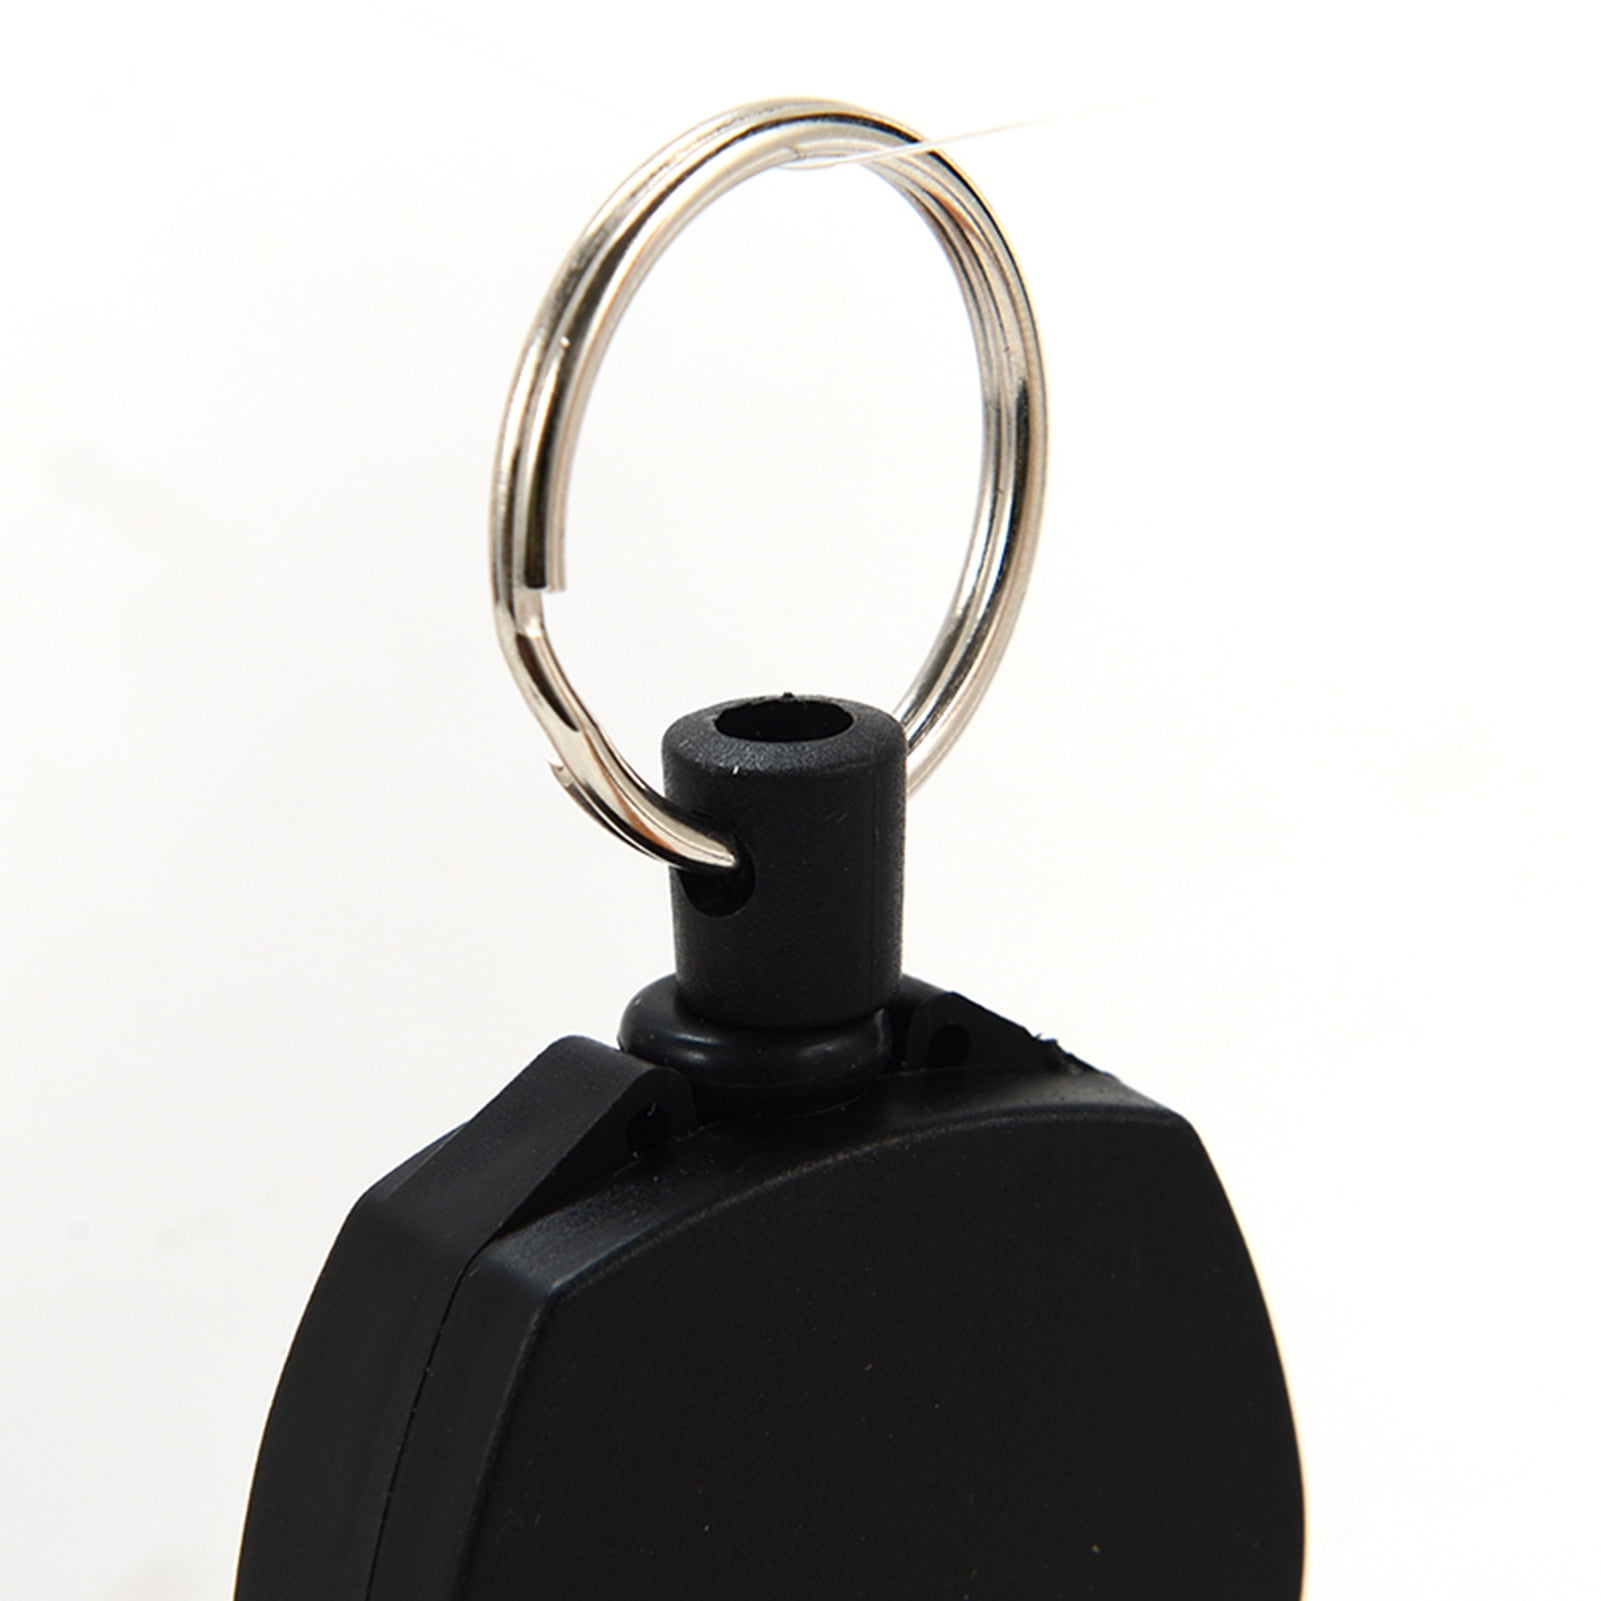 Retractable Wire Rope Keychain With Anti Lost Recoil And Keyring Ring  Holder 4cm Width From Yambags, $6.64